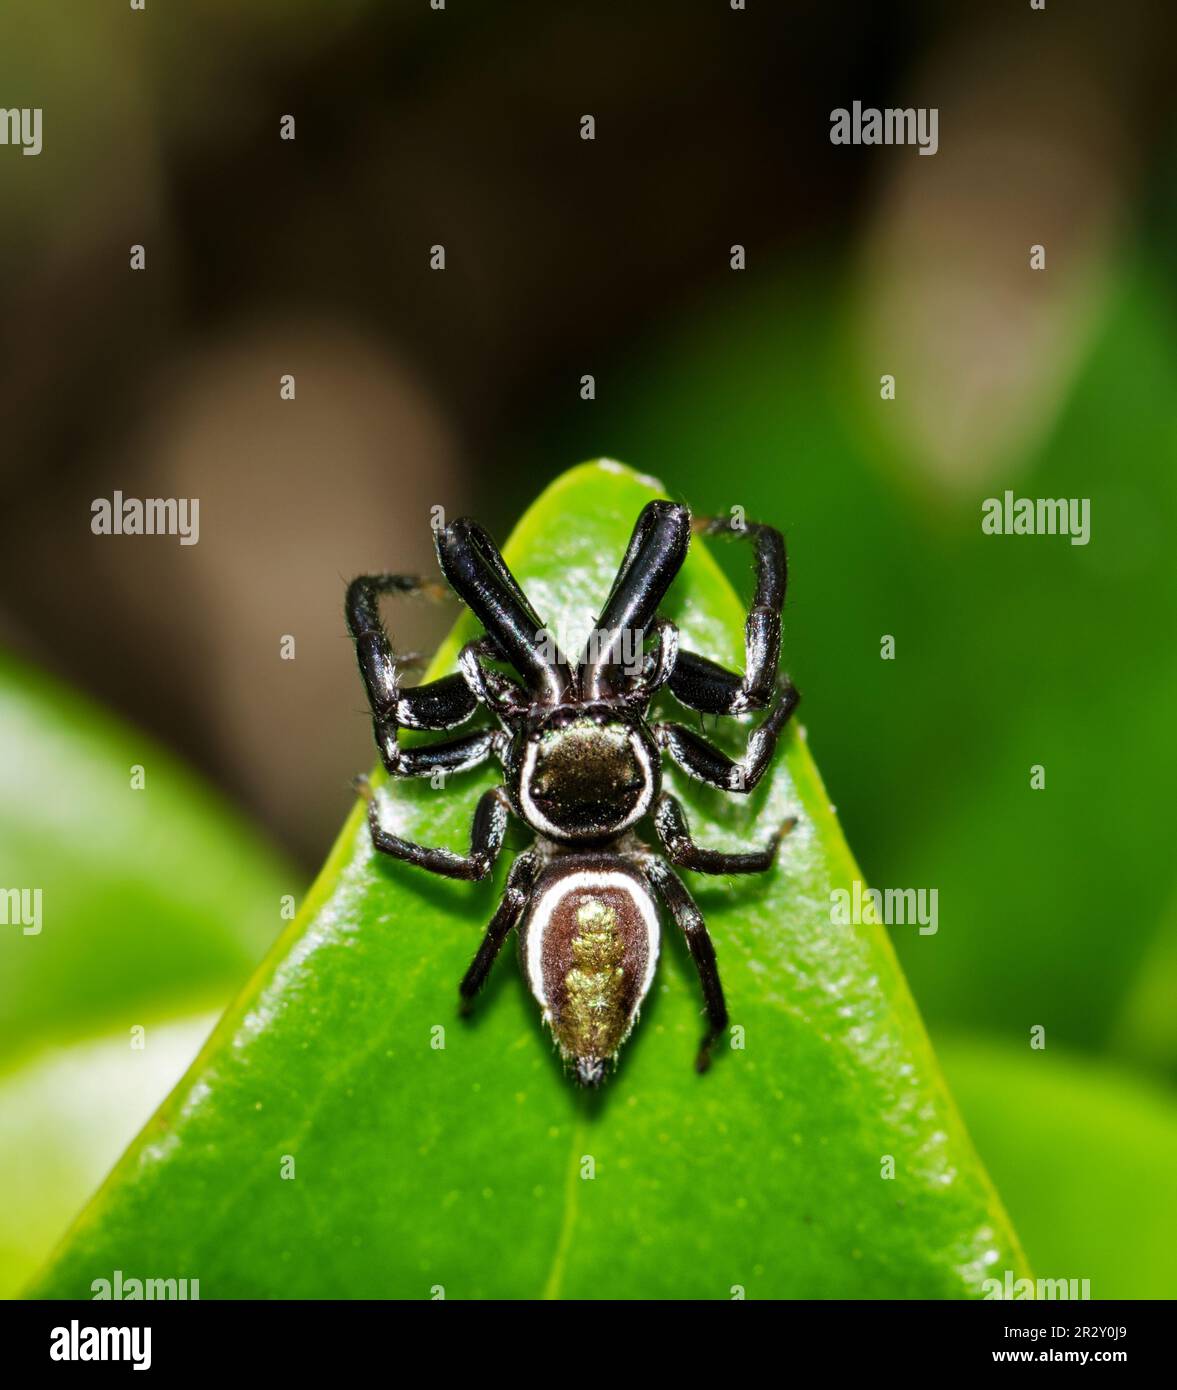 Jumping Spider (Messua limbata) on Indian hawthorn leaves, dorsal view. This arachnid species is found in the southern USA and Mexico. Stock Photo